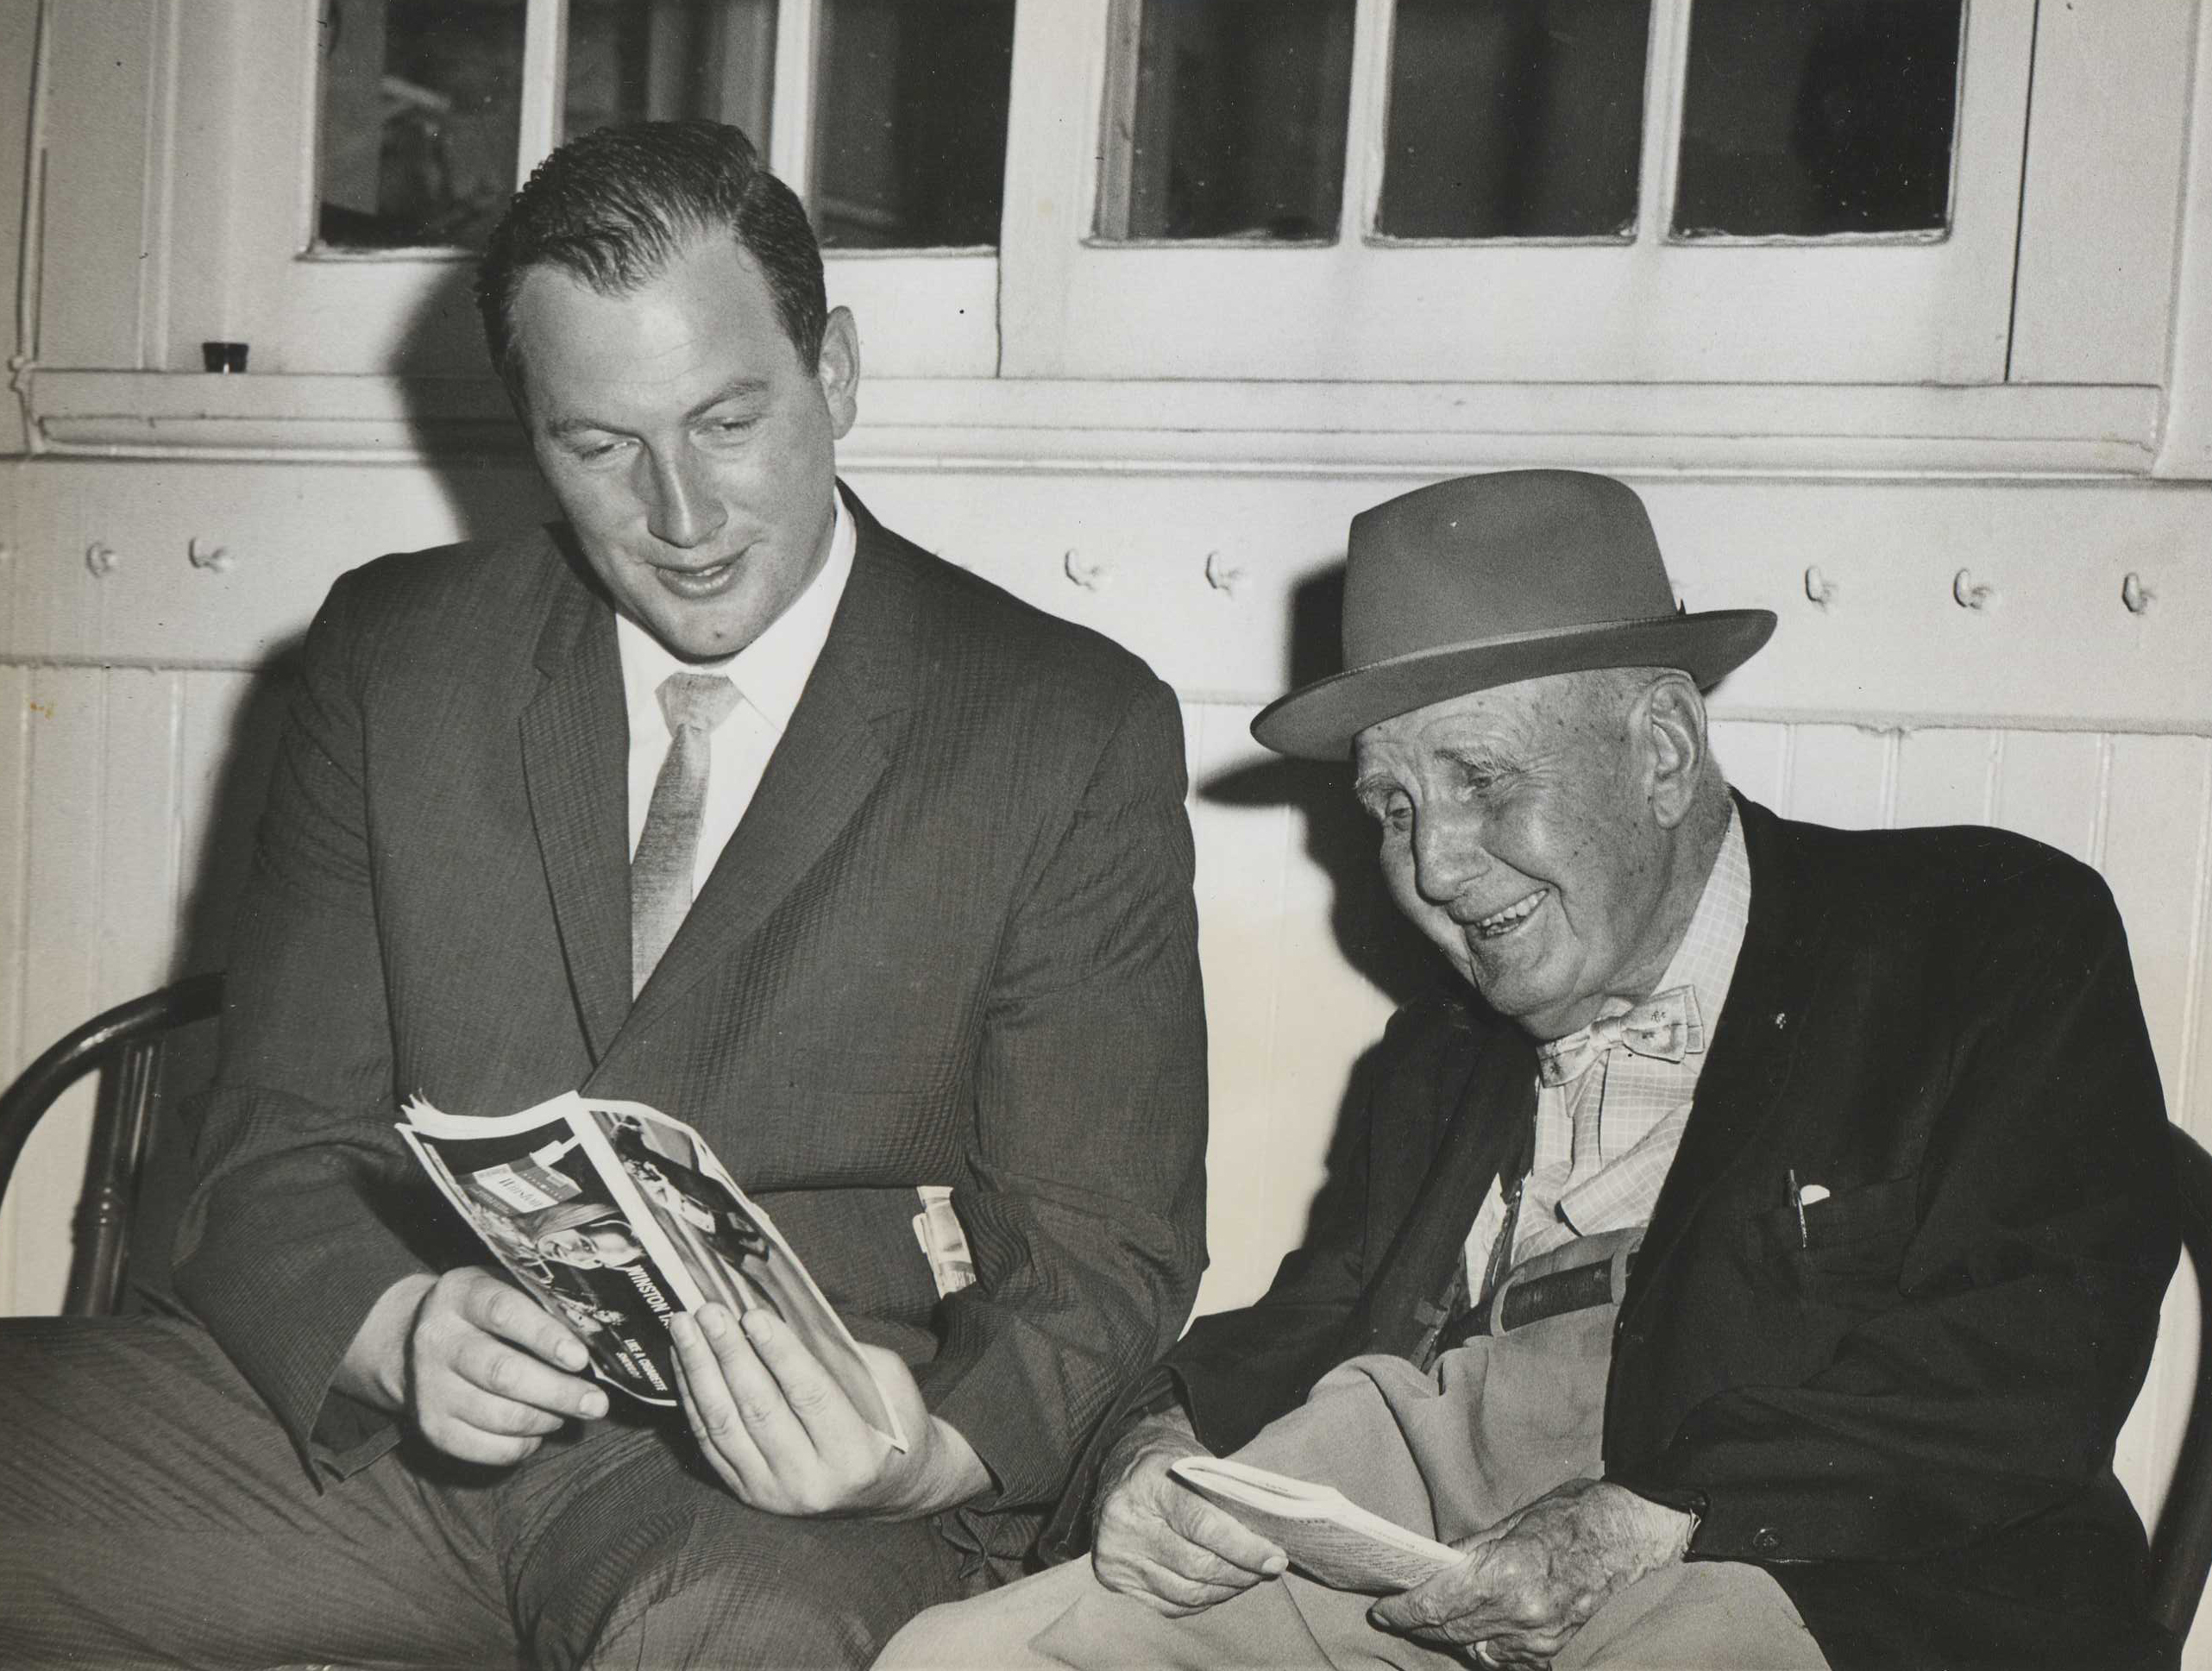 Allen Jerkens, left, and Sunny Jim Fitzsimmons at Aqueduct, 1962 (Museum Collection)